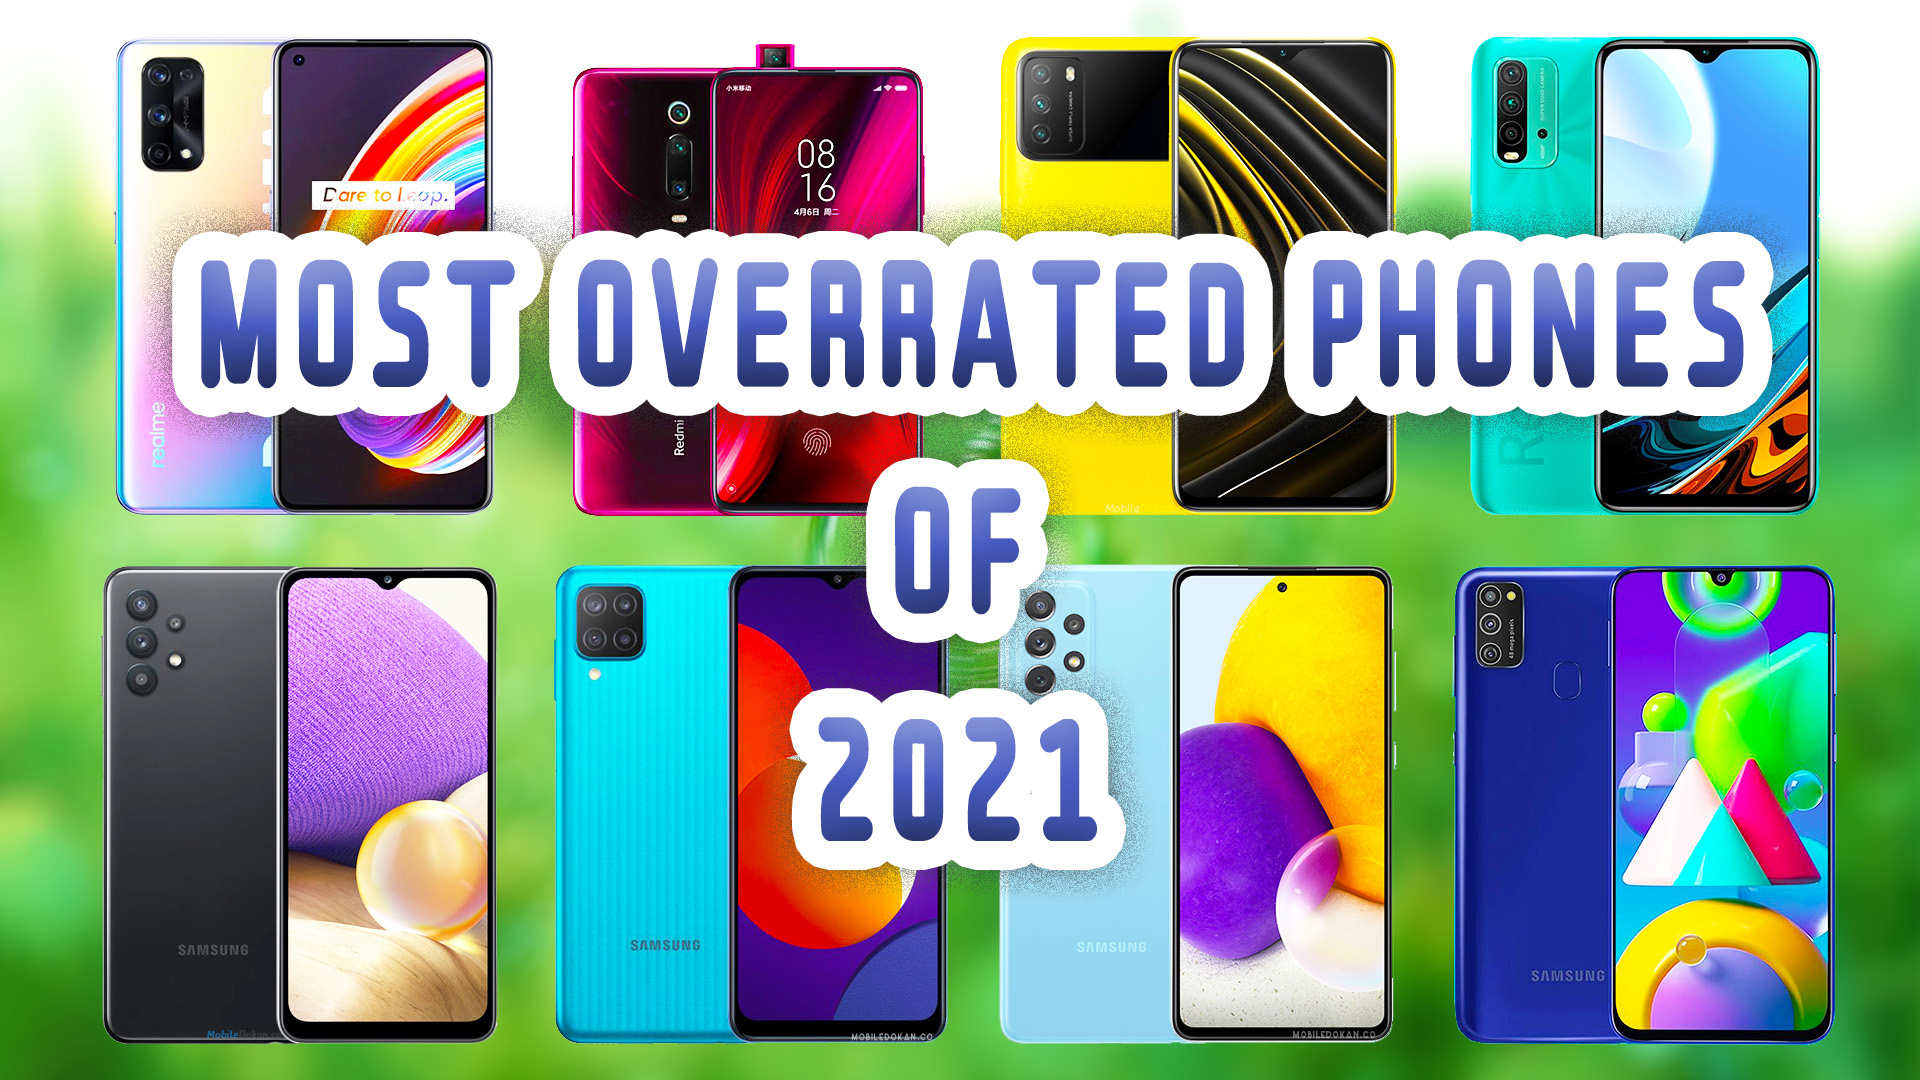 Most Overrated Phones of 2021